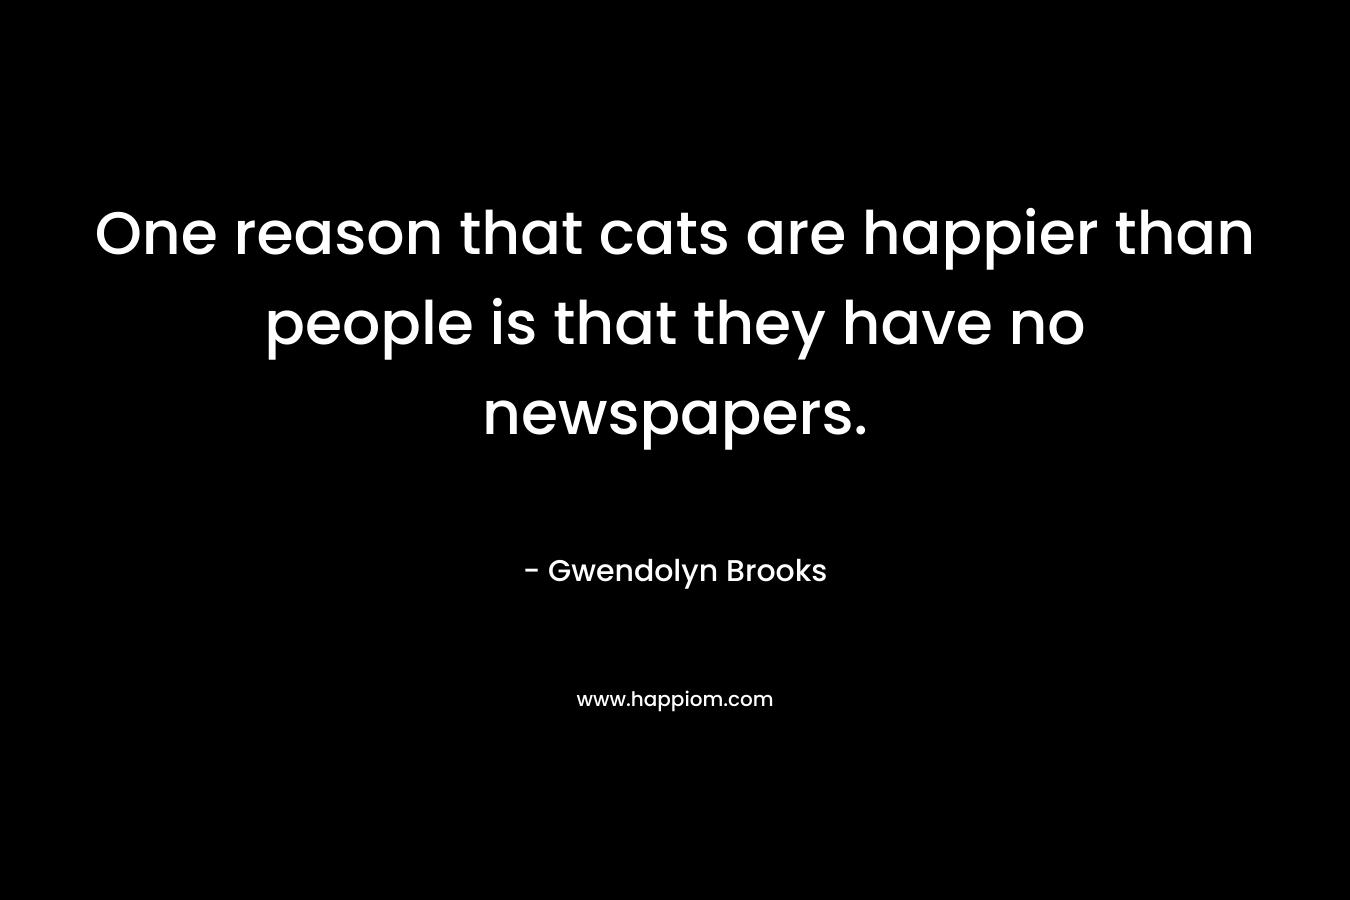 One reason that cats are happier than people is that they have no newspapers. – Gwendolyn Brooks